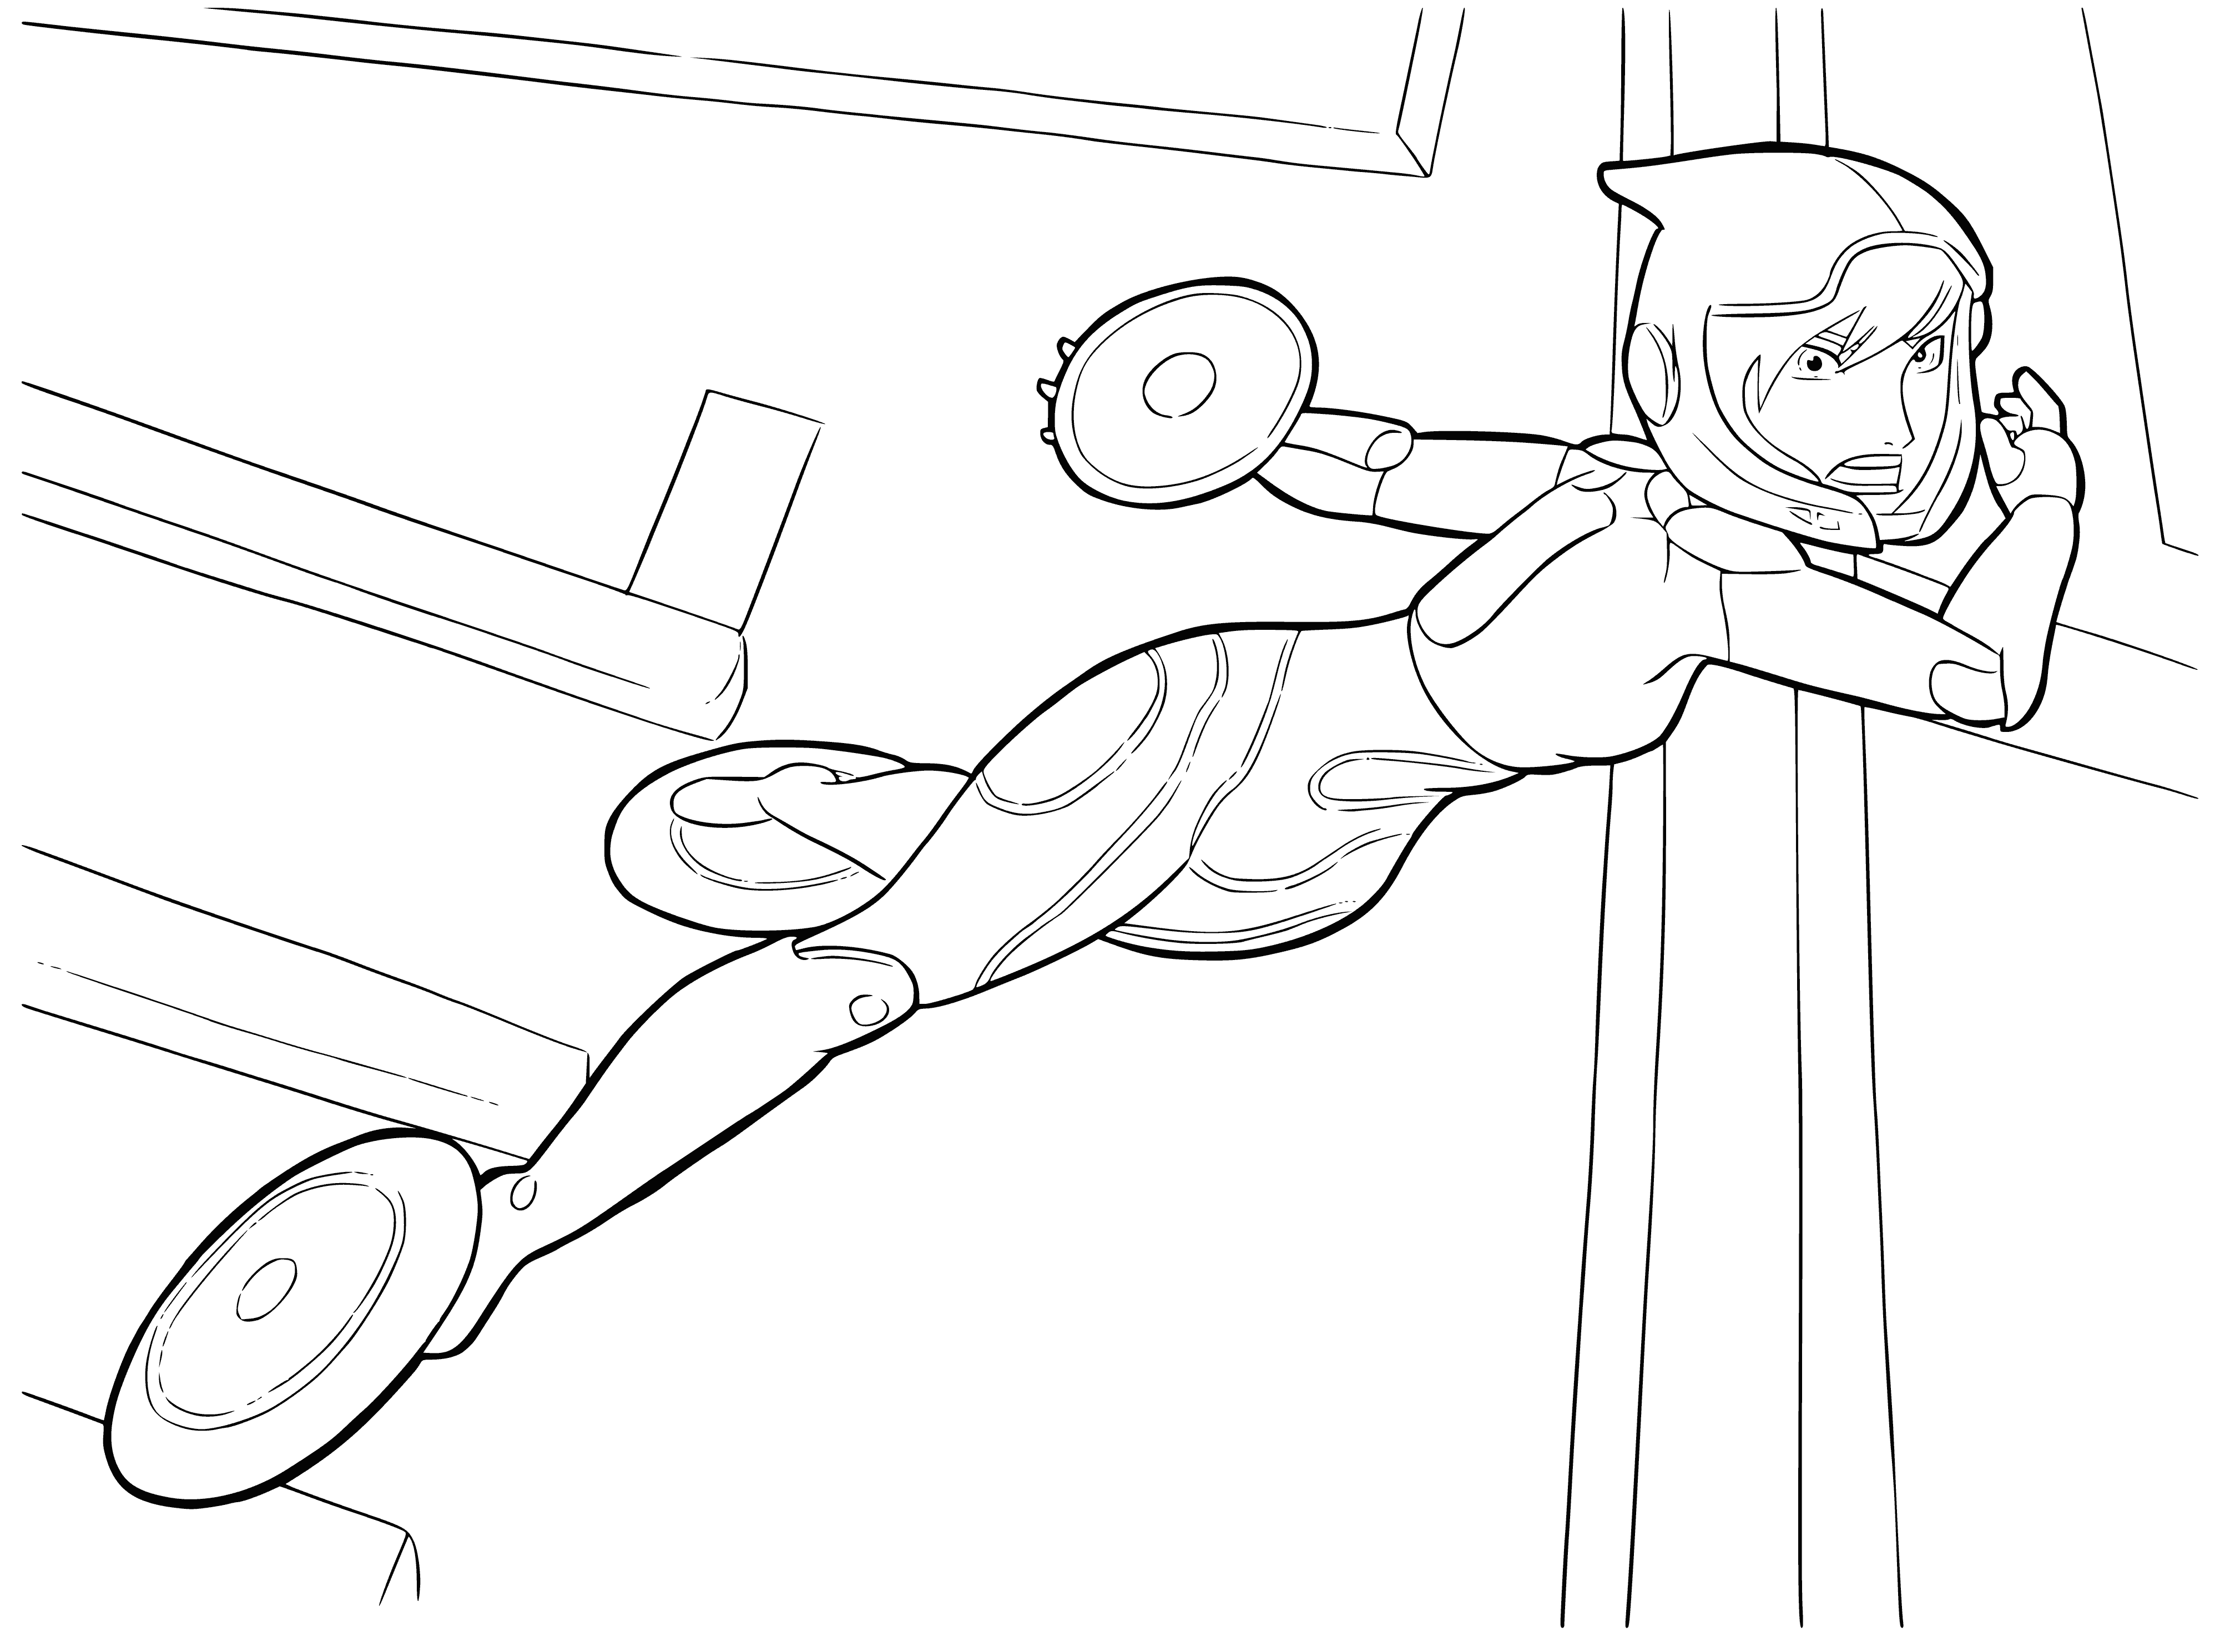 GoGo Tomago loves speed coloring page